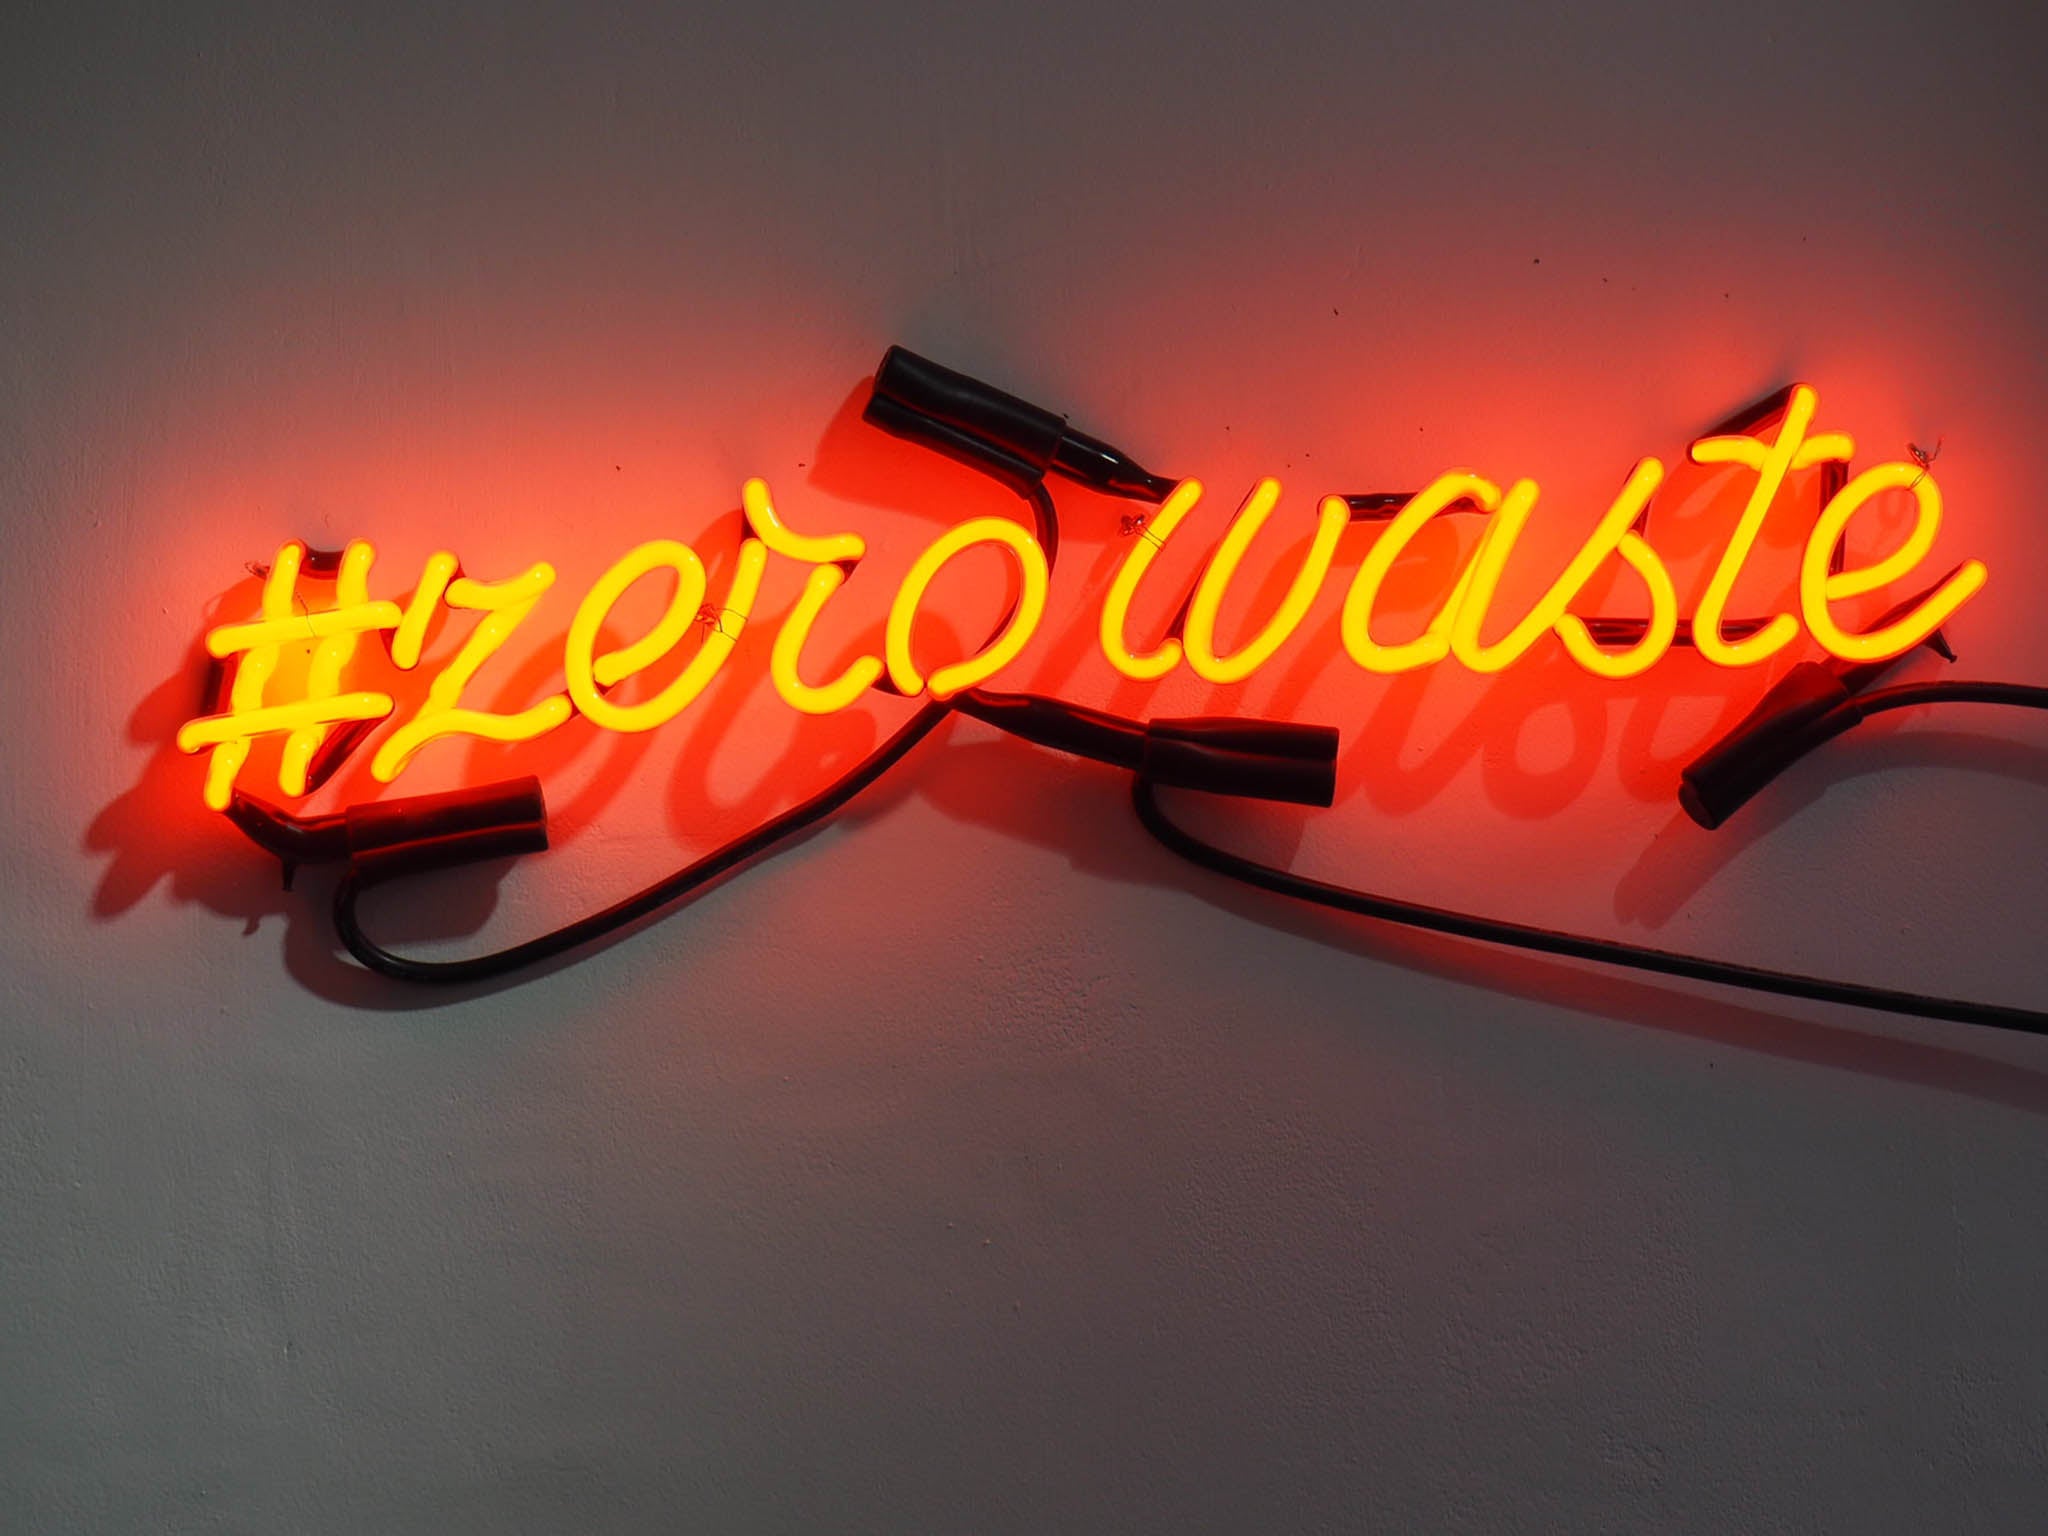 Living by their ethos: the shop's neon sign says it all